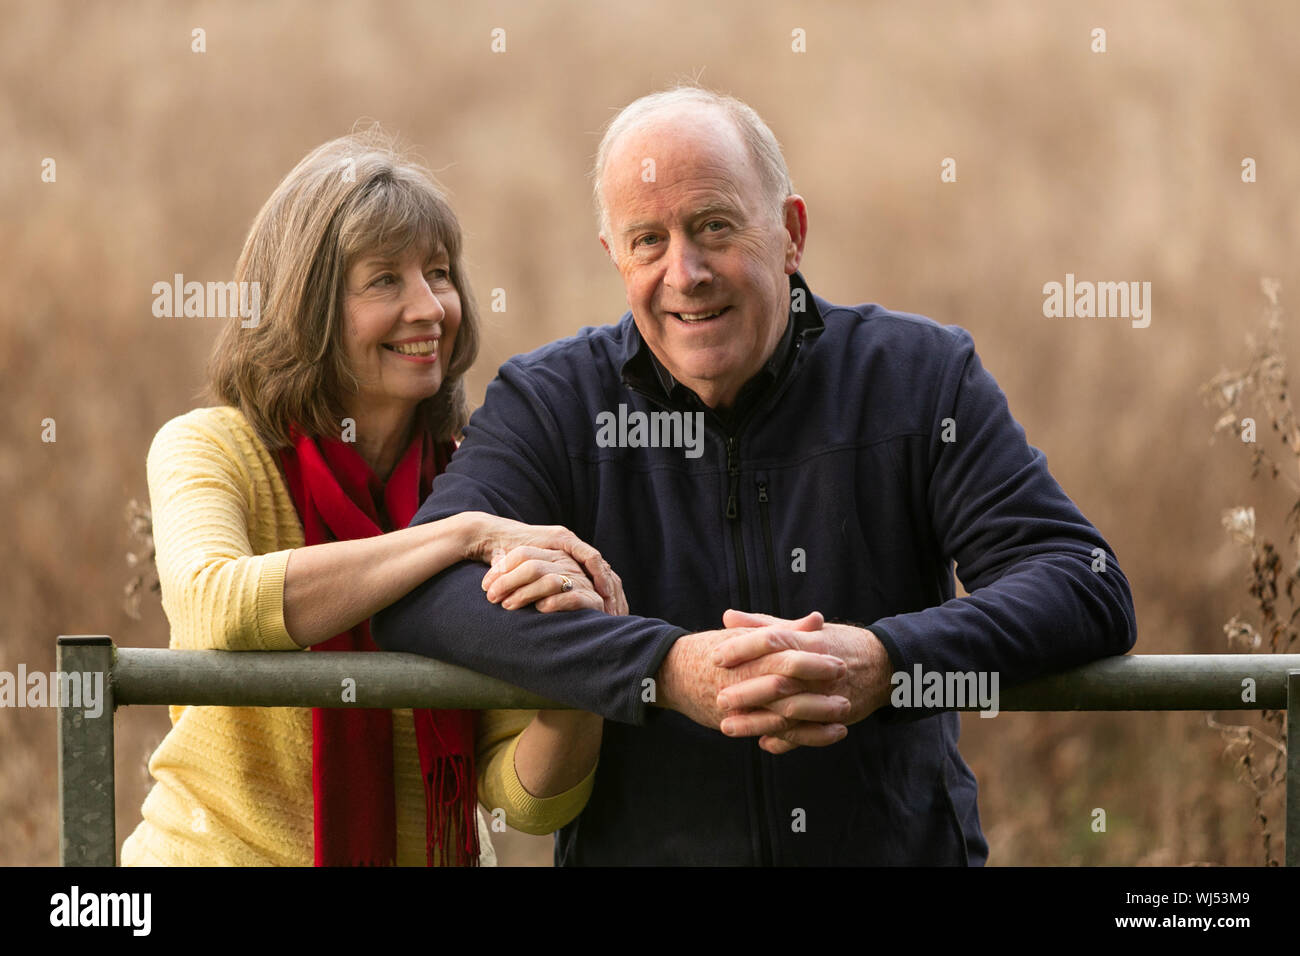 Older couple happy together Stock Photo